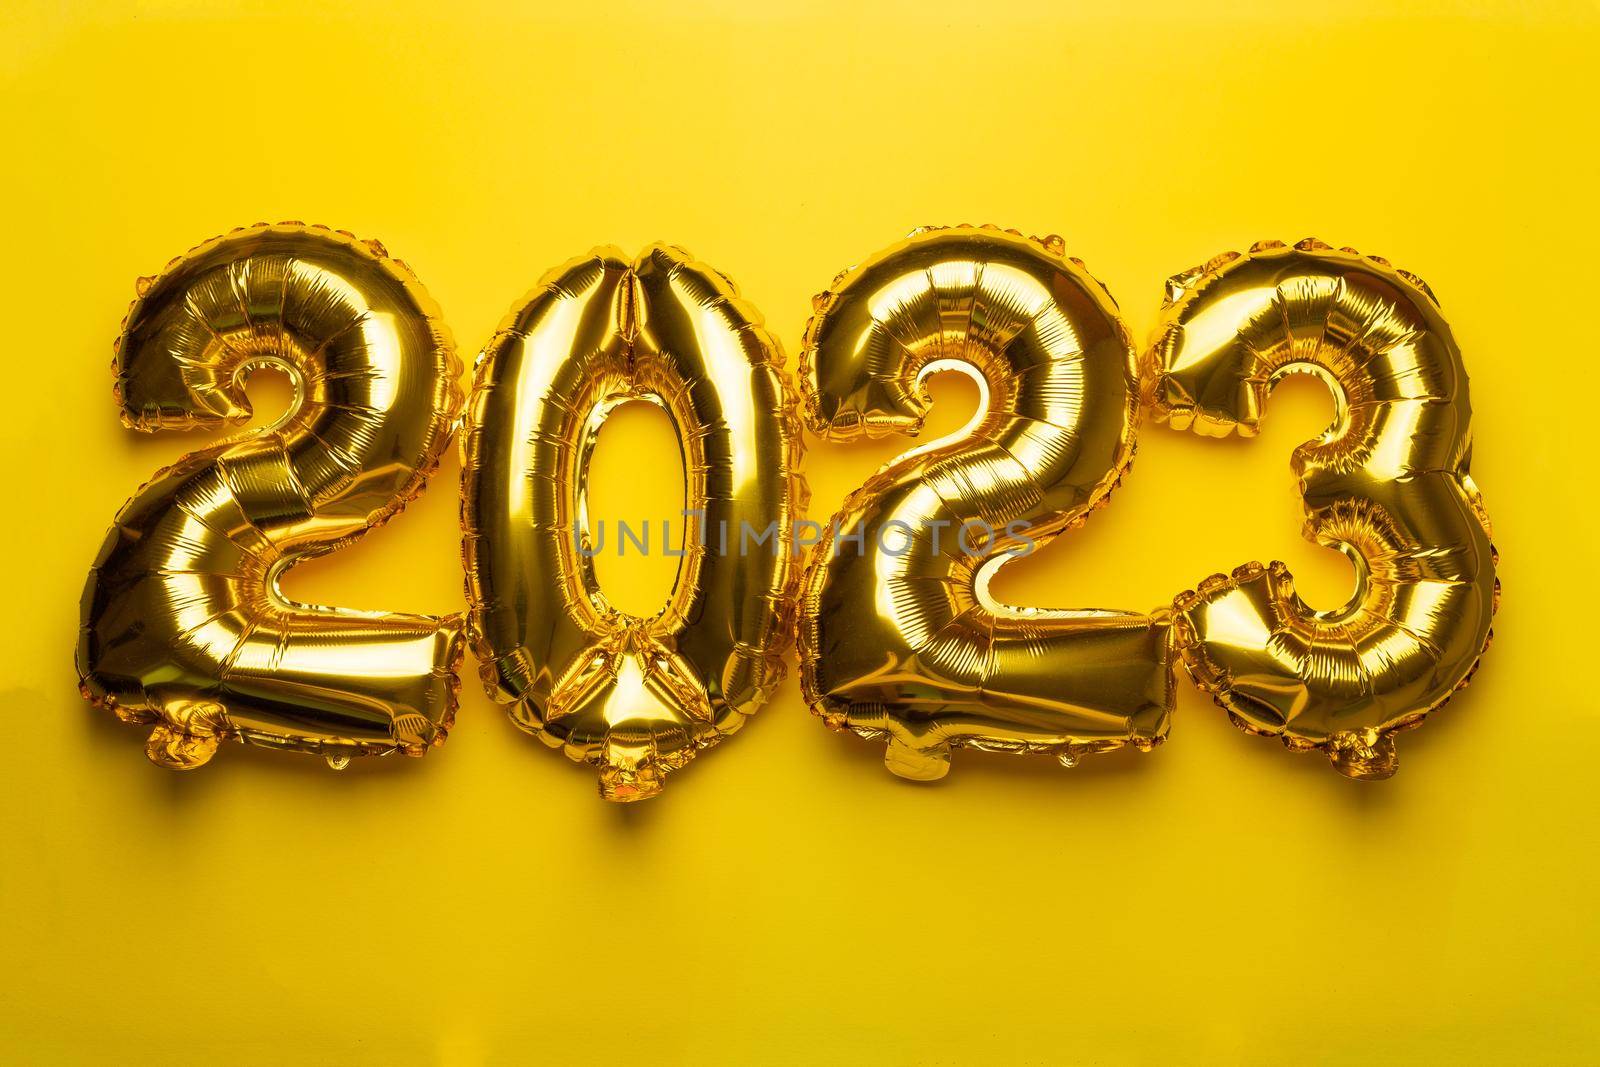 2023 Happy New Year concept from golden foil balloon by adamr